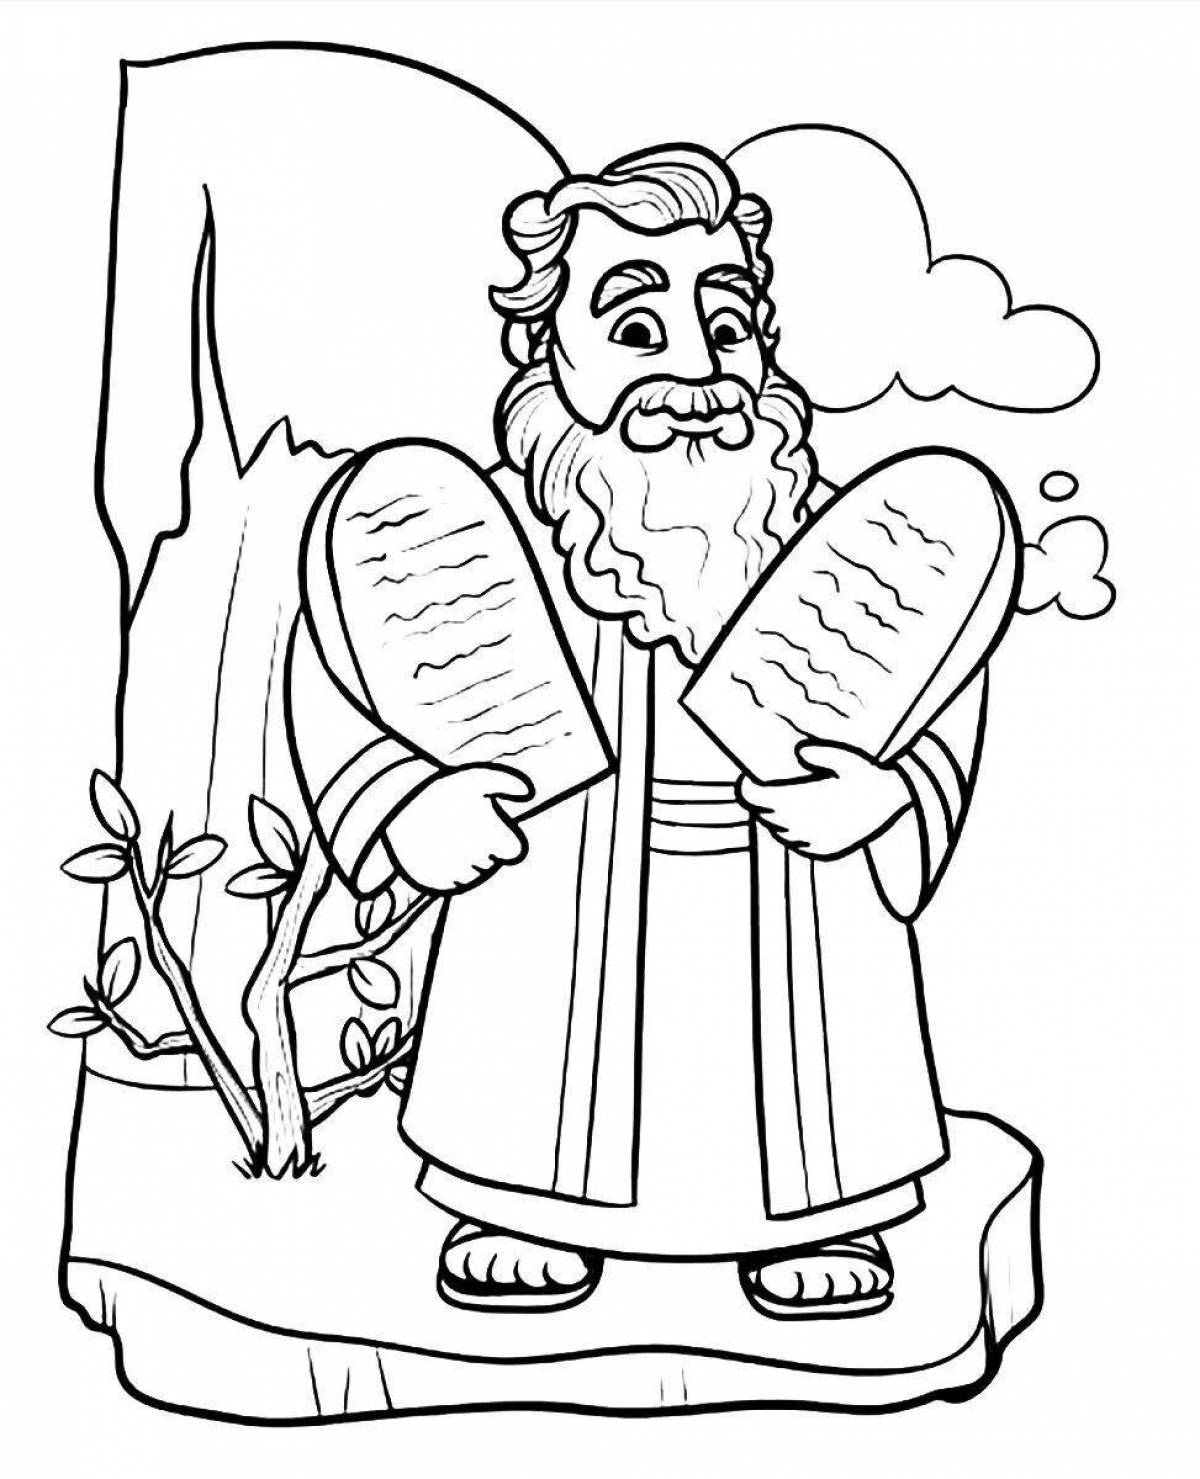 Playful moses coloring page for kids